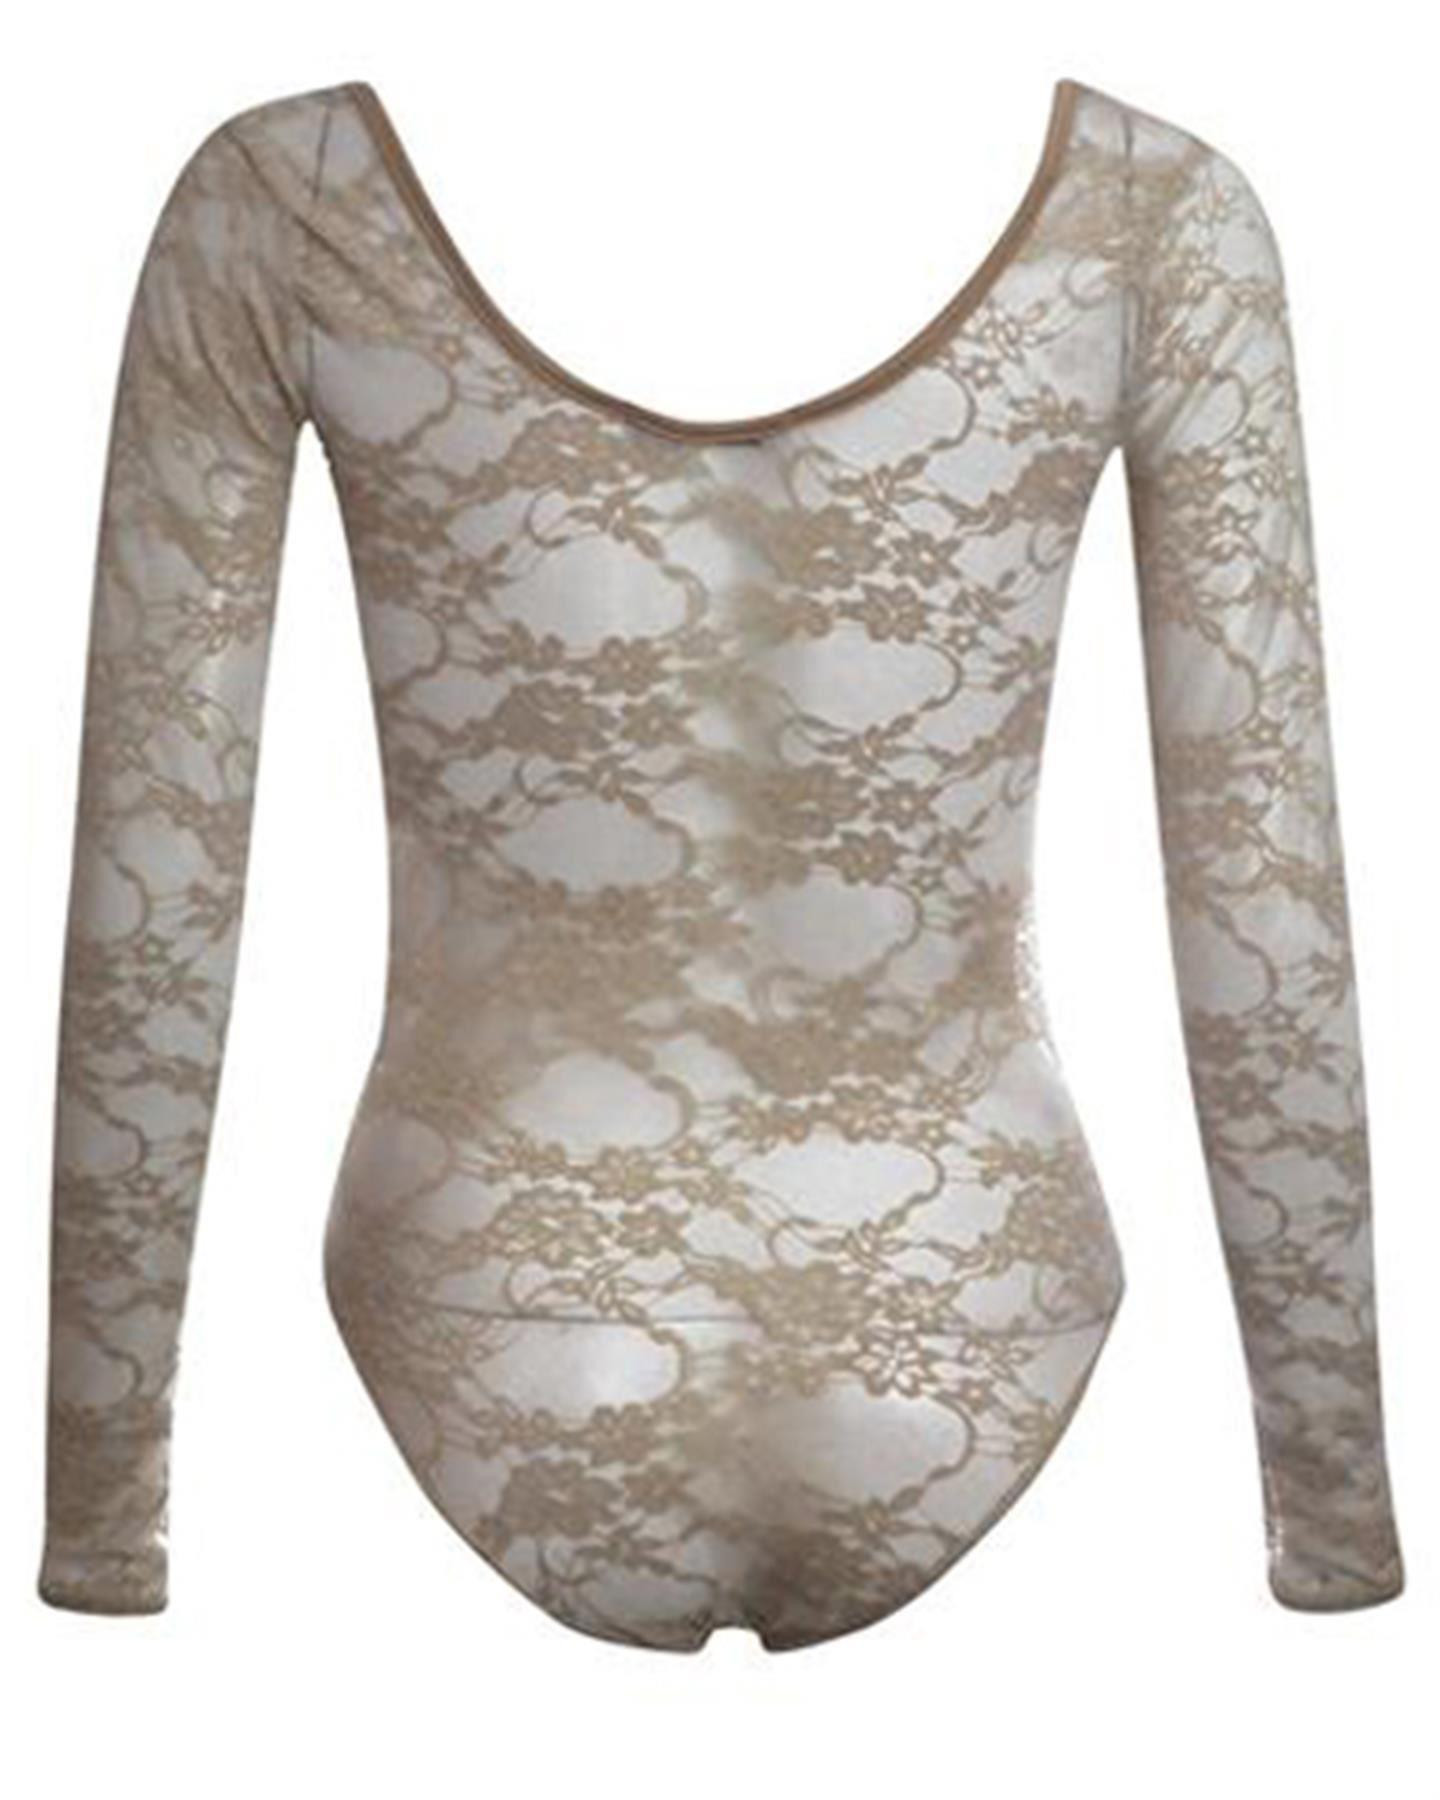 Nel Floral Lace Full Sleeve Leotard Bodysuits Top 8-14 - Spring Special